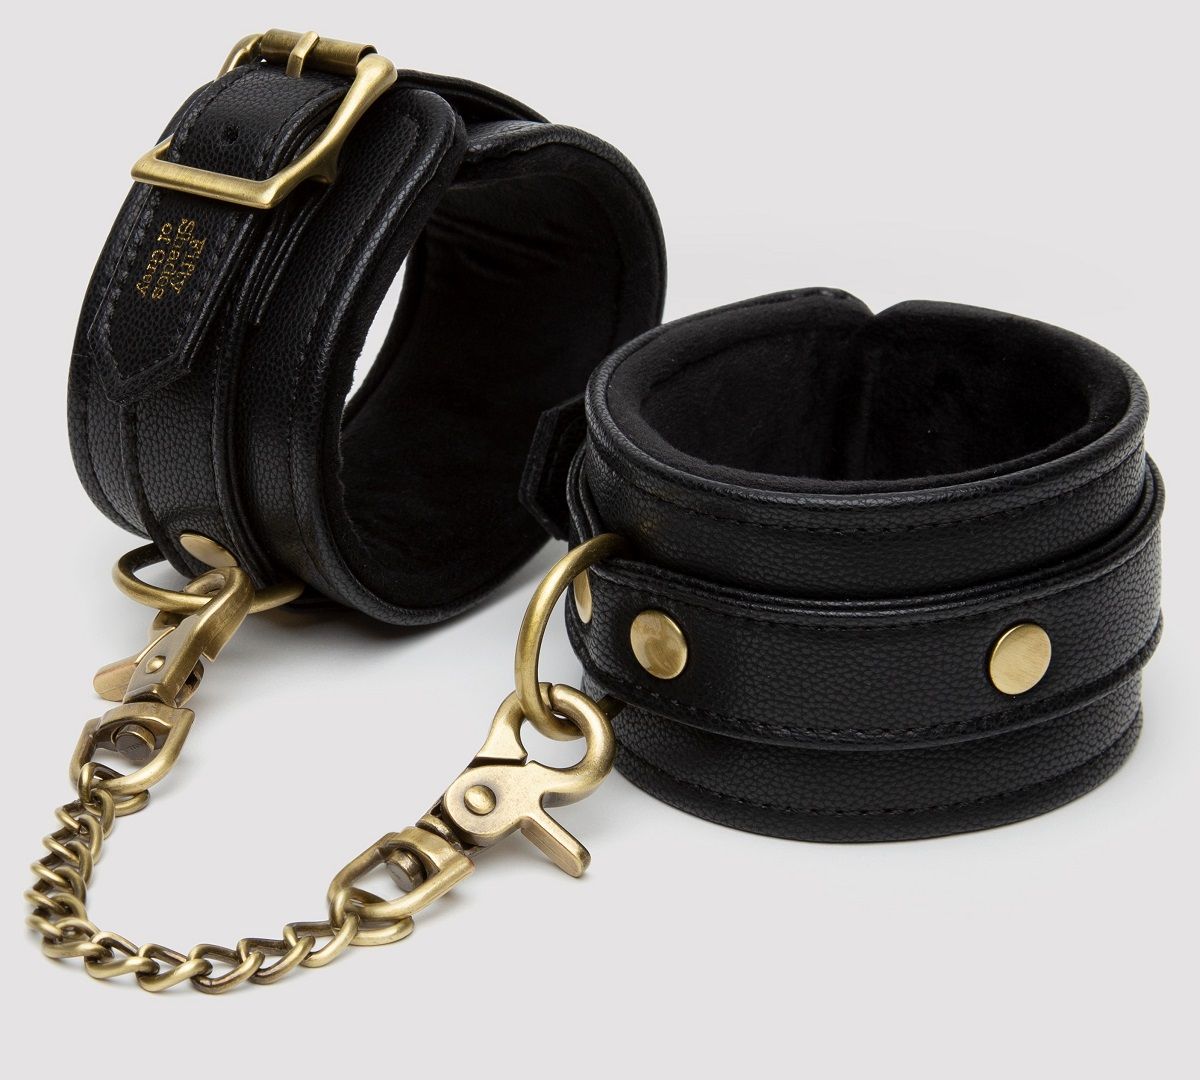     Bound to You Faux Leather Ankle Cuffs